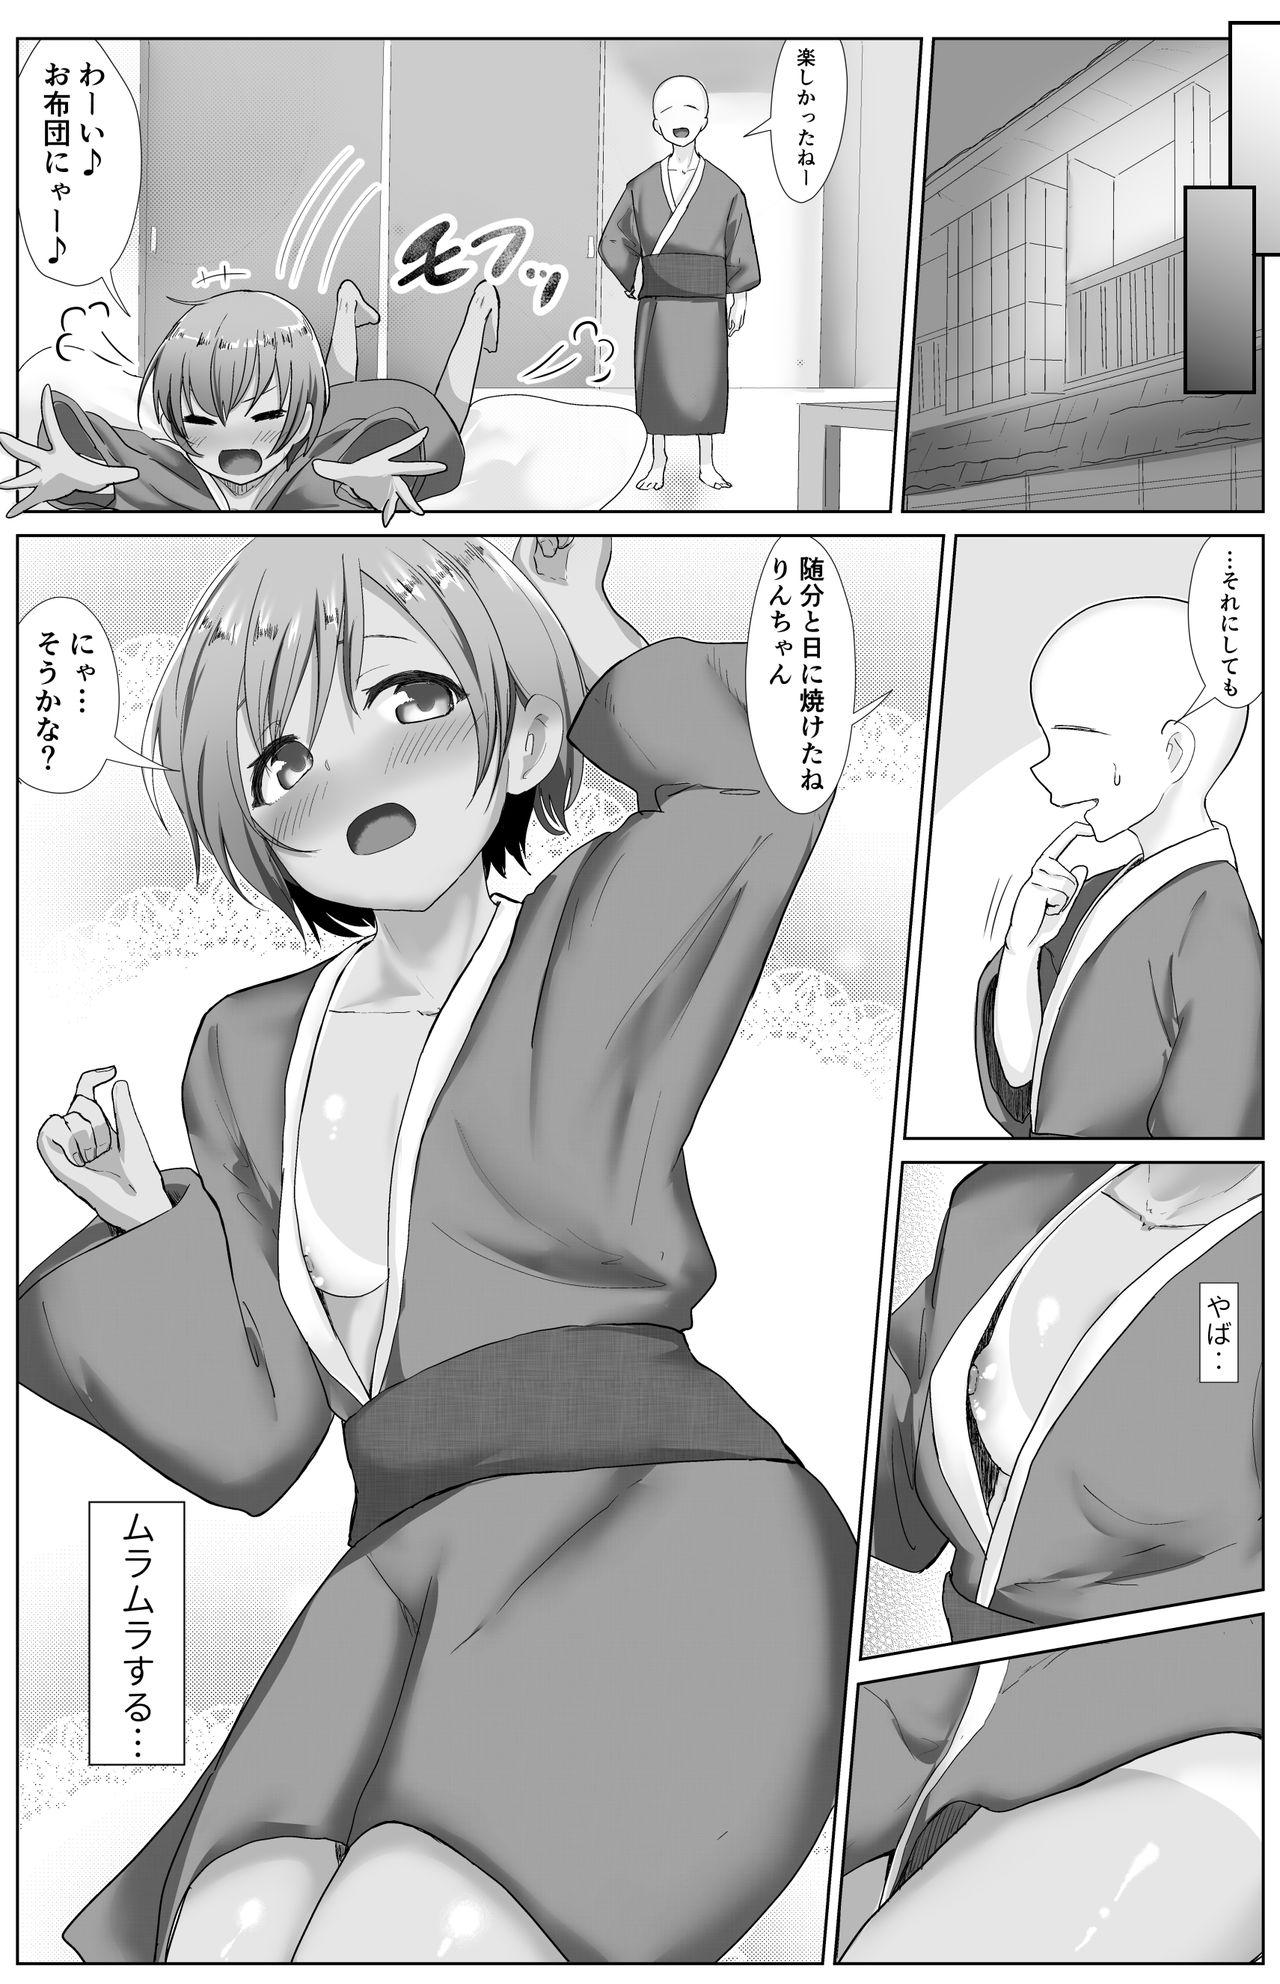 Sexcam e-rn fanbox short love live doujinshi collection - Love live Sexy Whores - Page 2